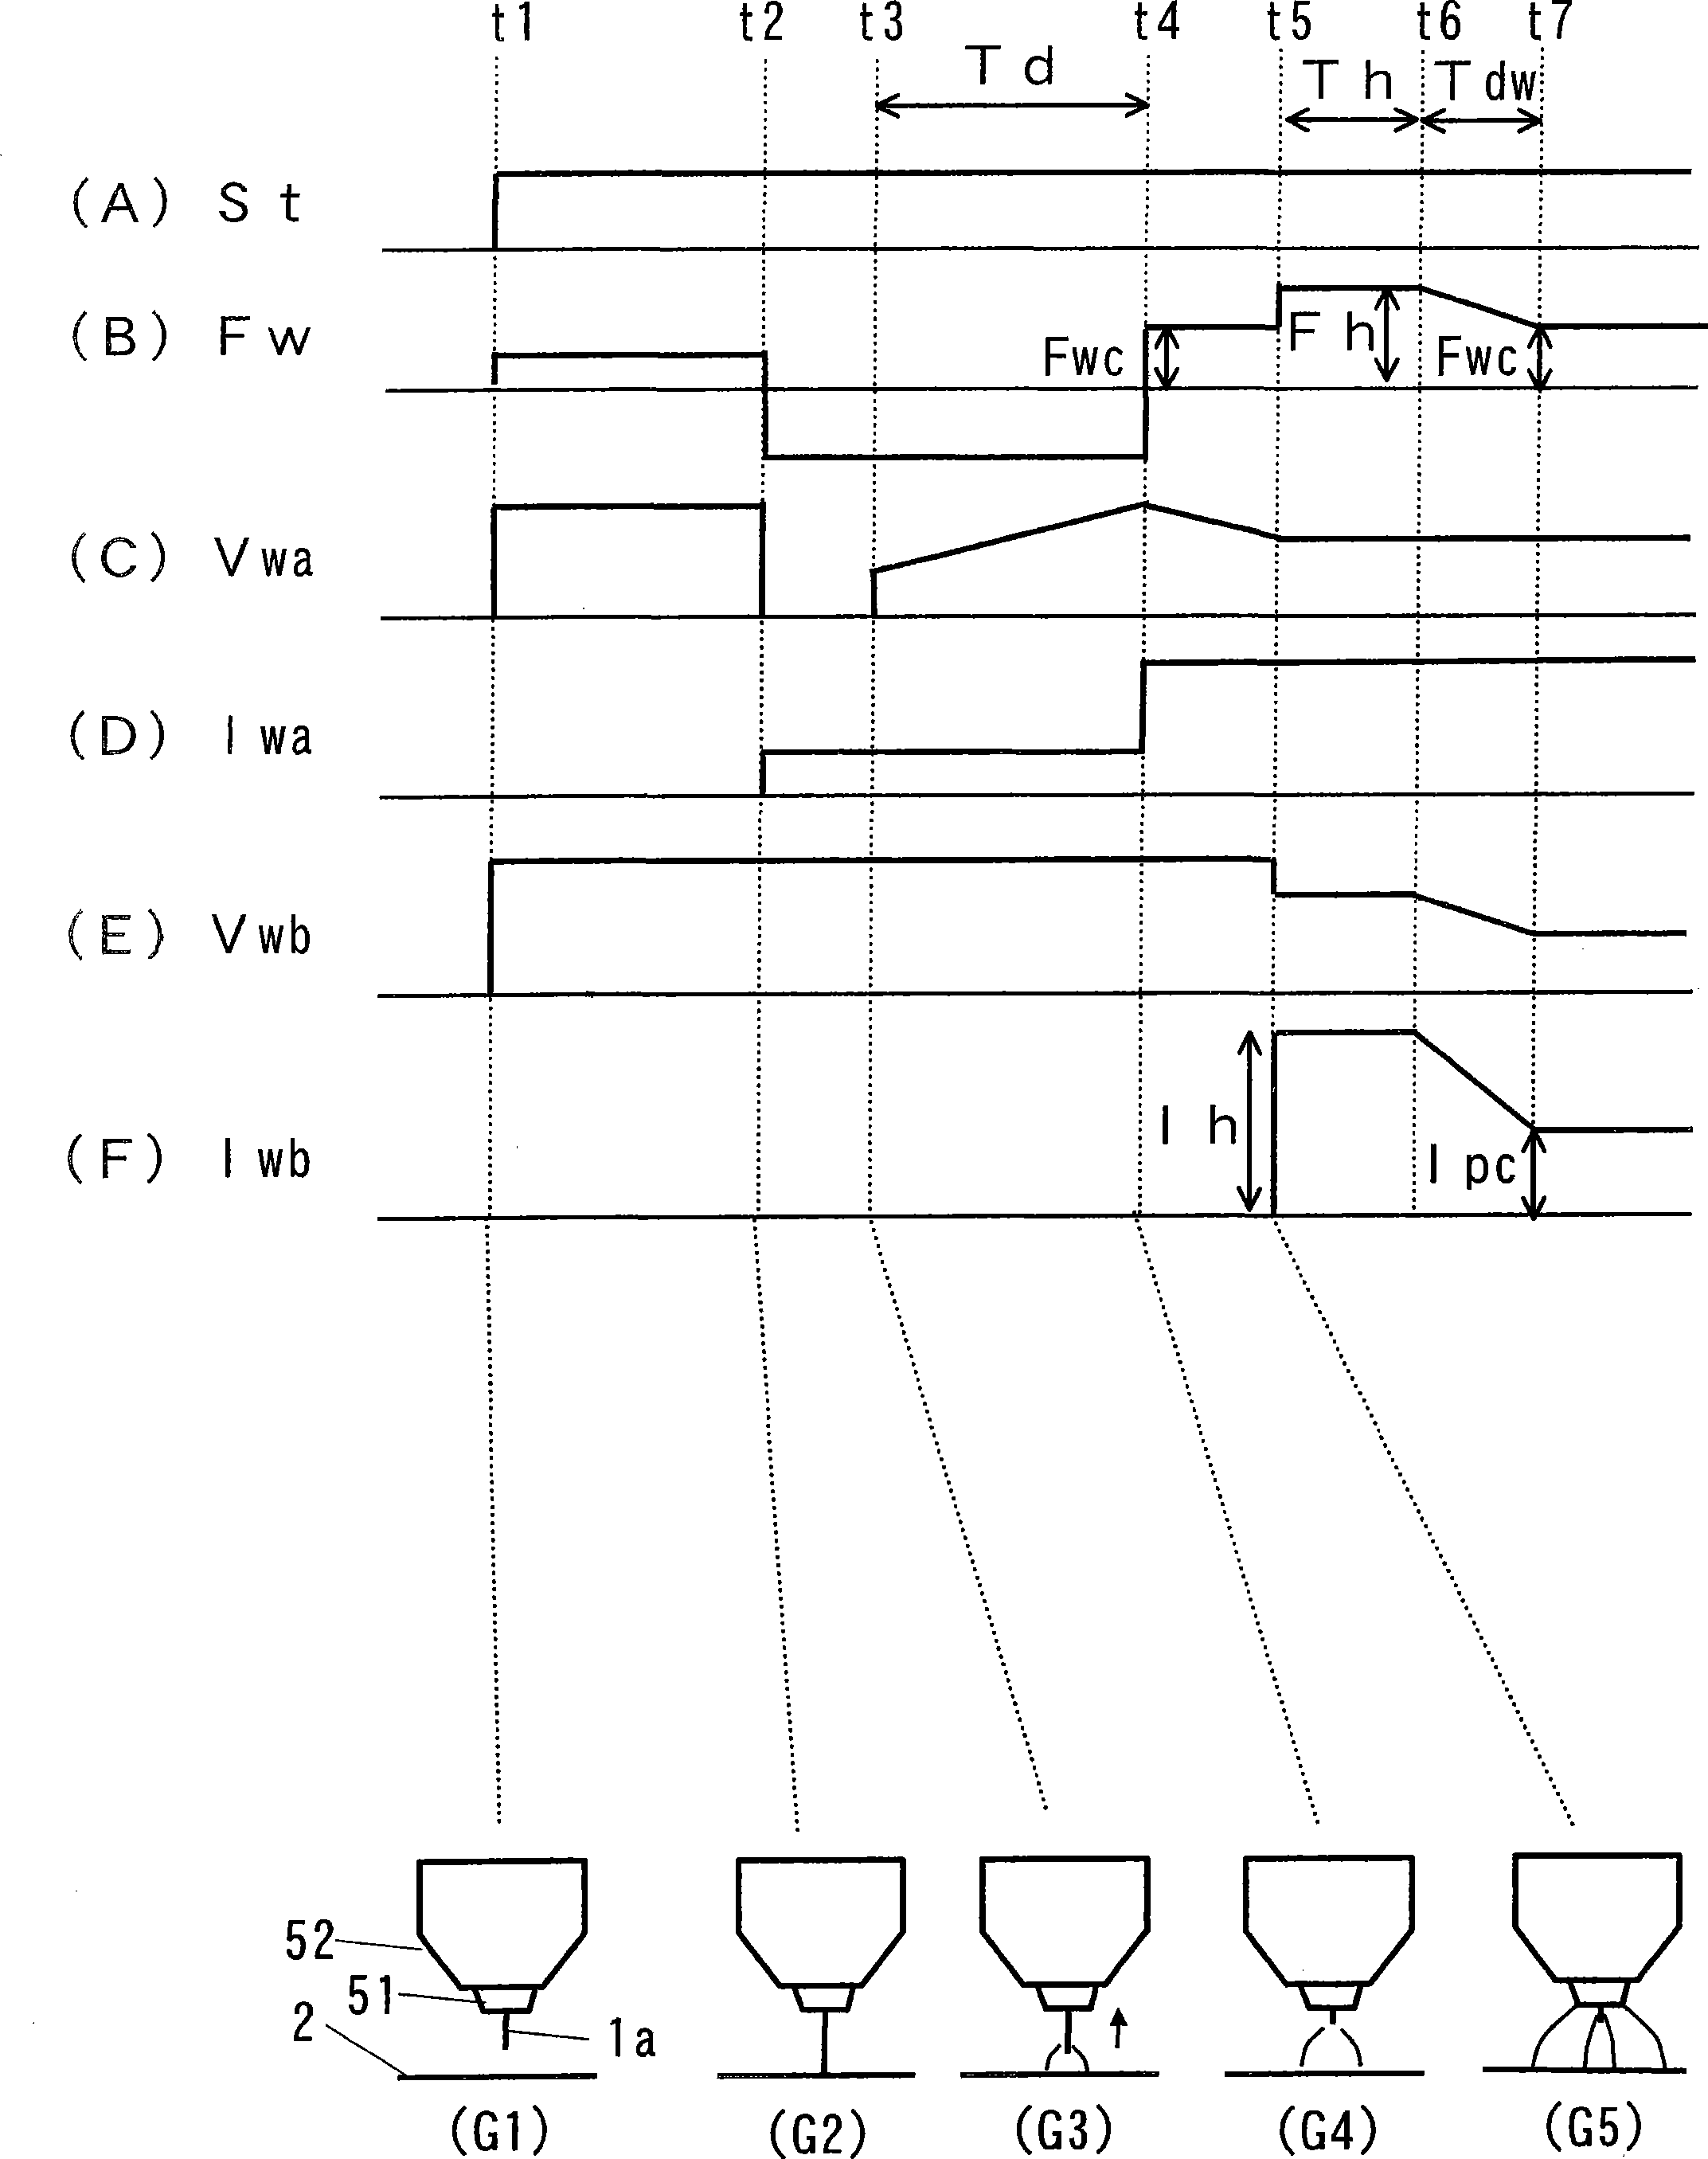 Arc striking control method for double-electrode electric arc welding